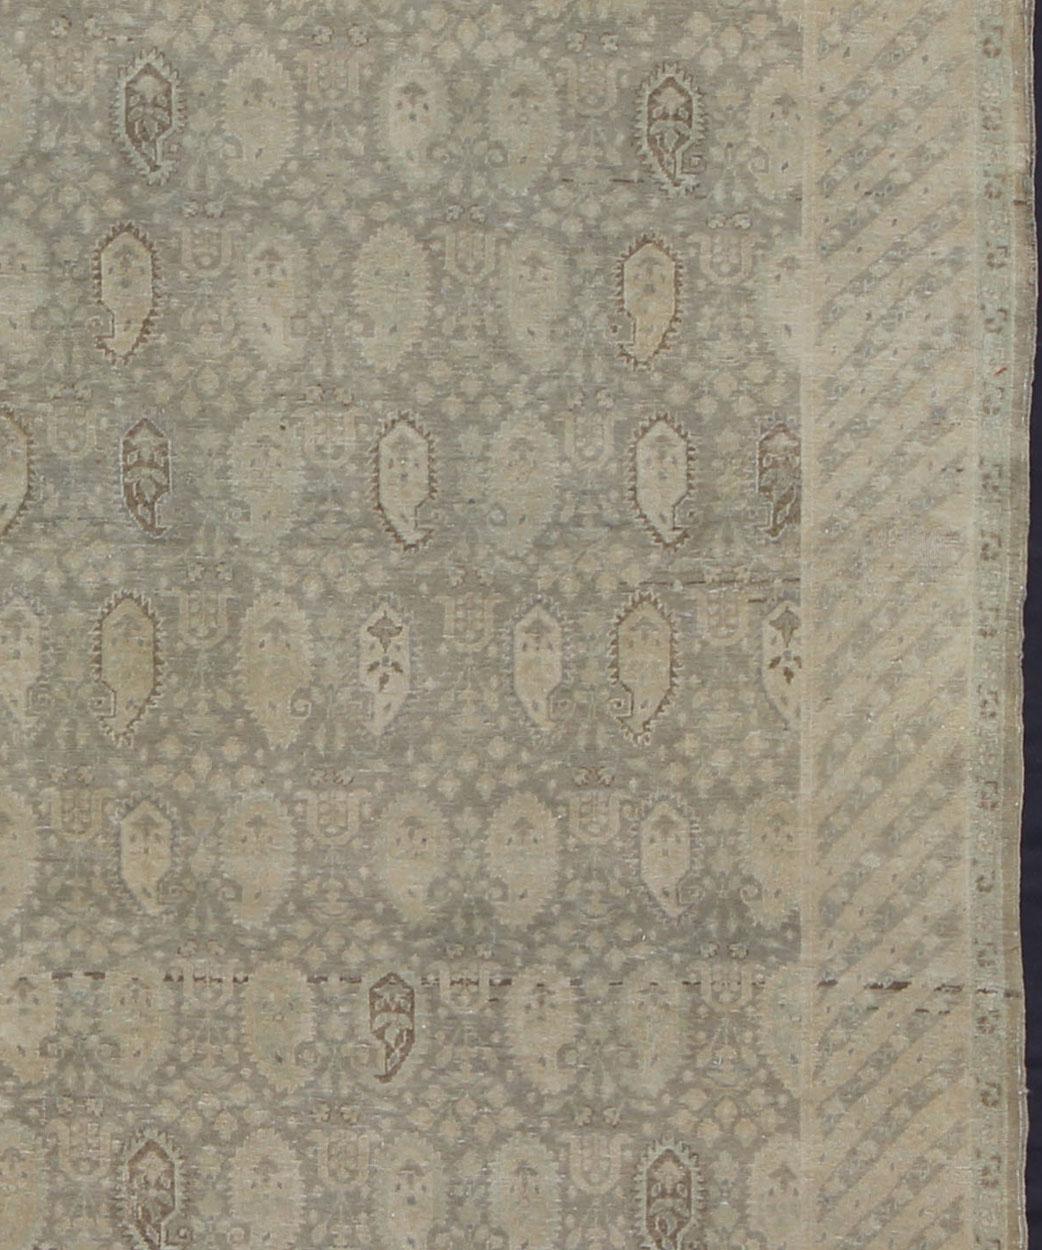 Measures: 6'8'' x 9'0''

Stylized paisley motifs are featured in a repeating pattern on this Sivas wool rug. A blend of Persian inspiration and Turkish design creates a unique, dynamic aesthetic in this while its taupe, gray, camel and gray-green